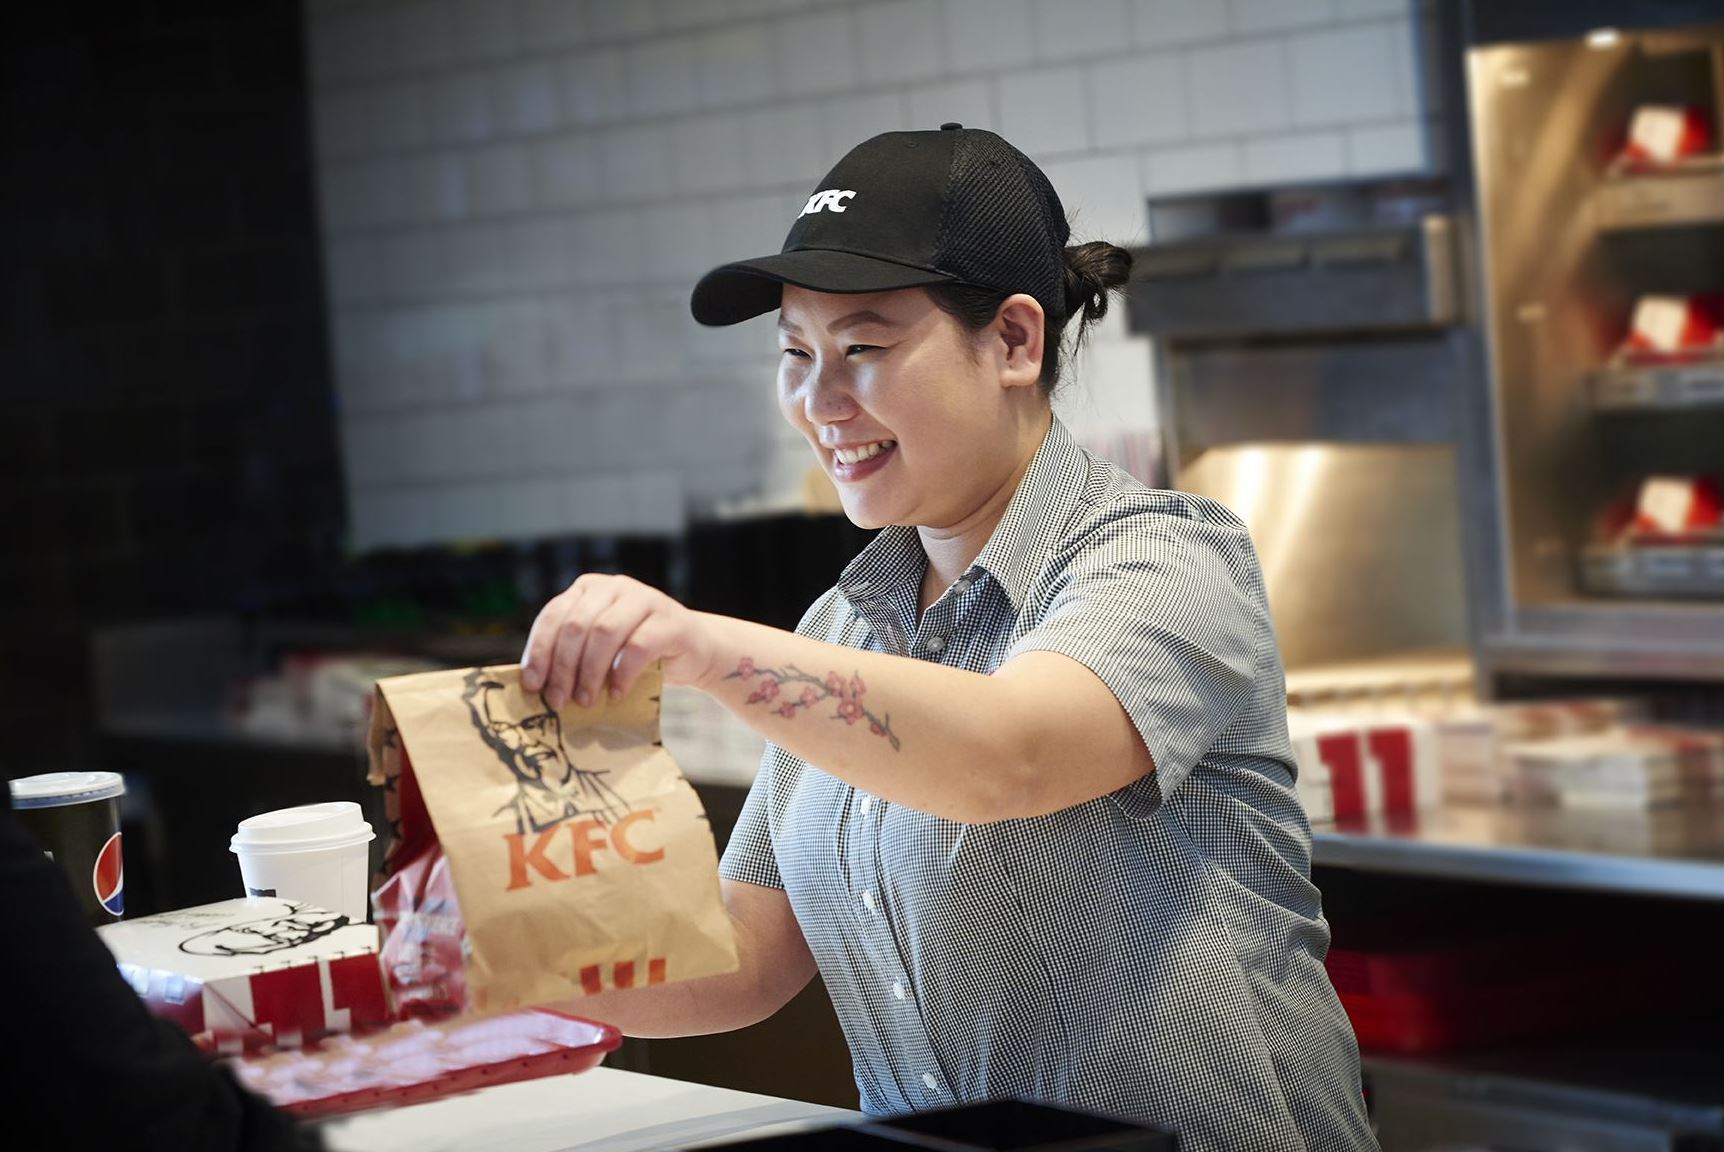 Team Member in KFC uniform at Welcome Break smiles as she offers a customer their order